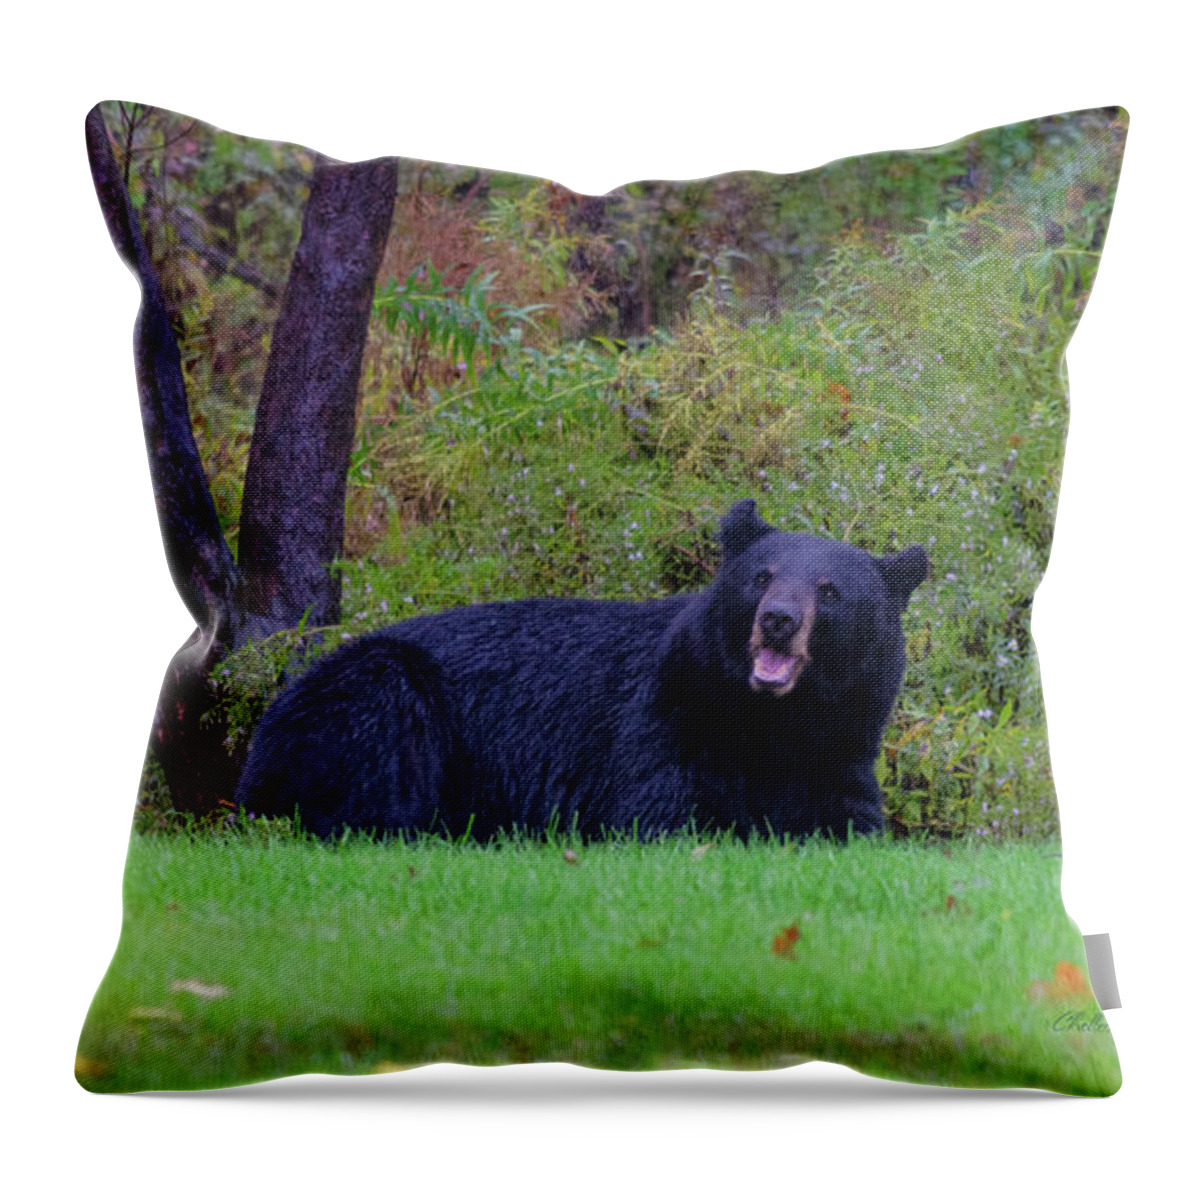 Bear Throw Pillow featuring the photograph Smiling Bear by ChelleAnne Paradis